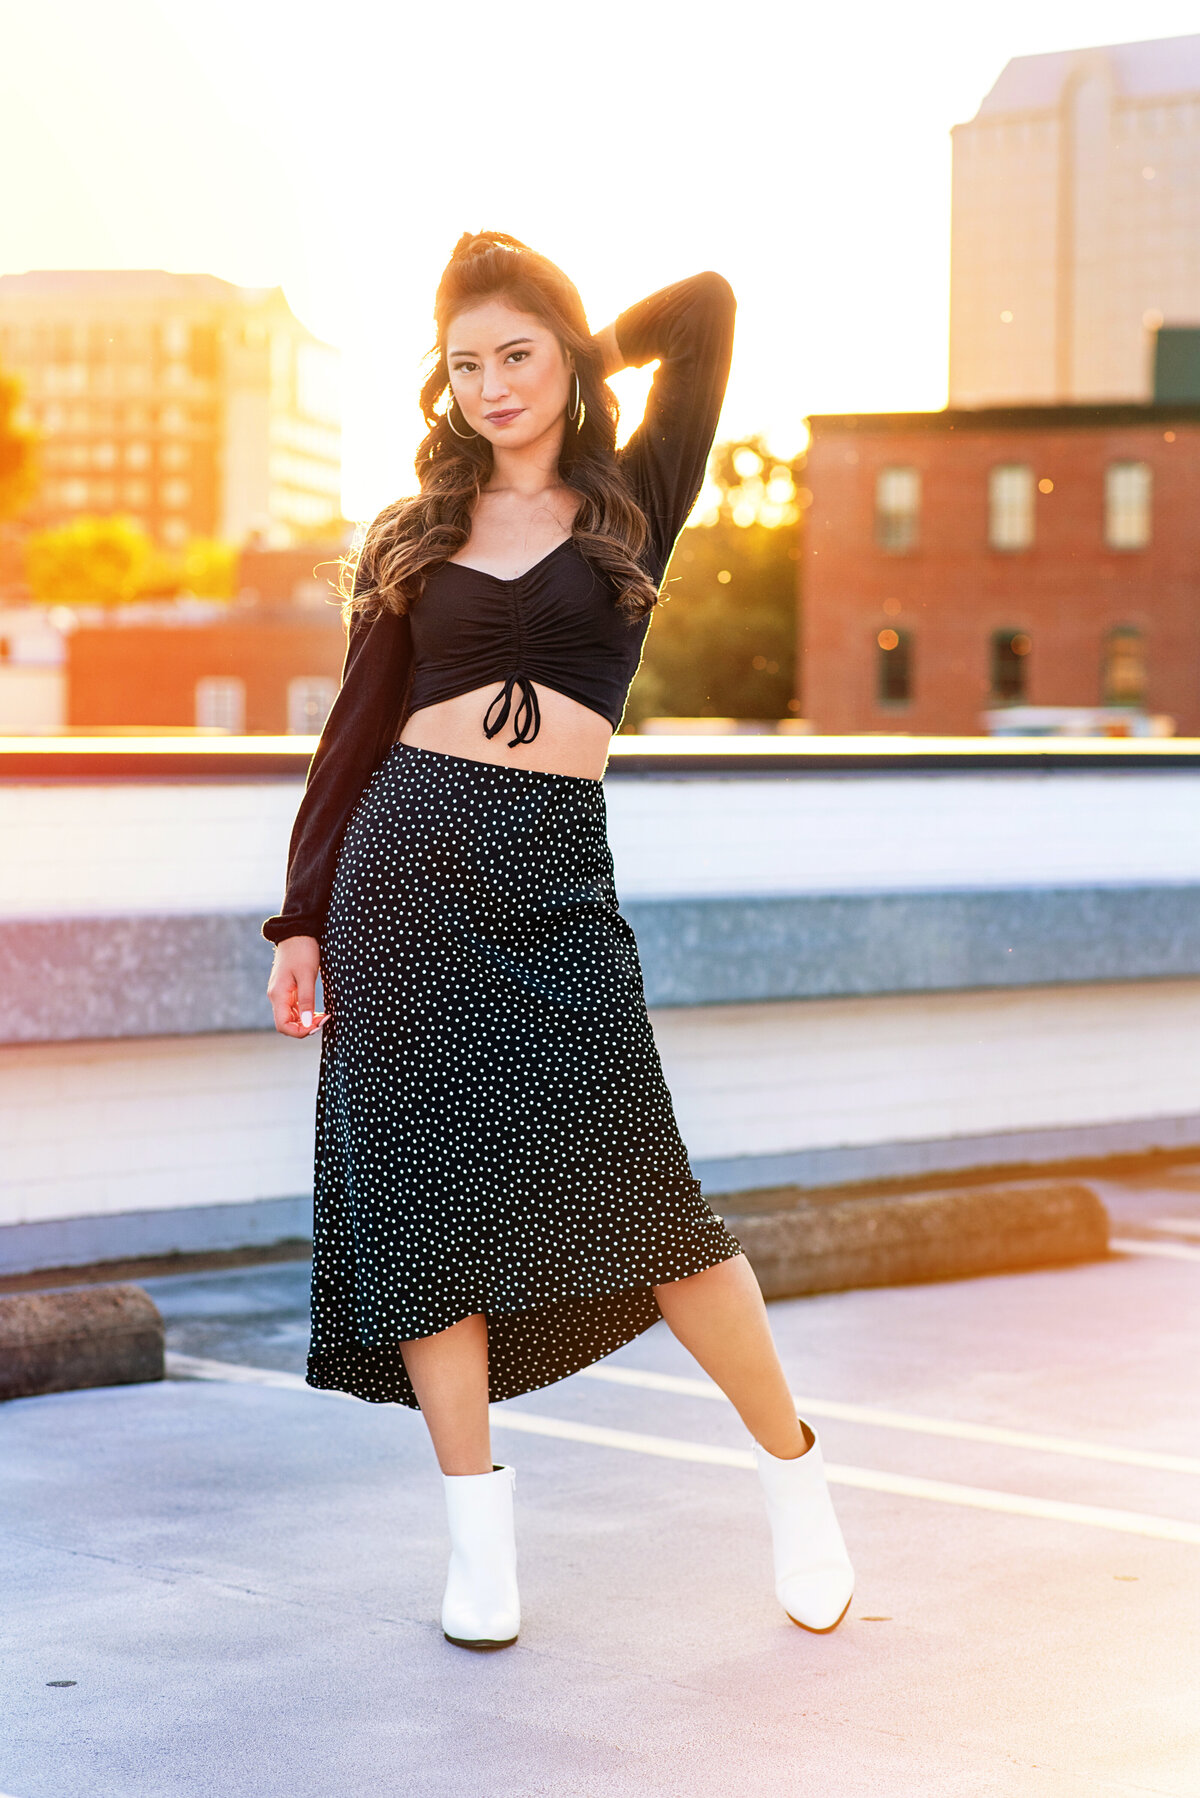 Senior girl at sunset on a rooftop wearing black midi skirt and white ankle boots.